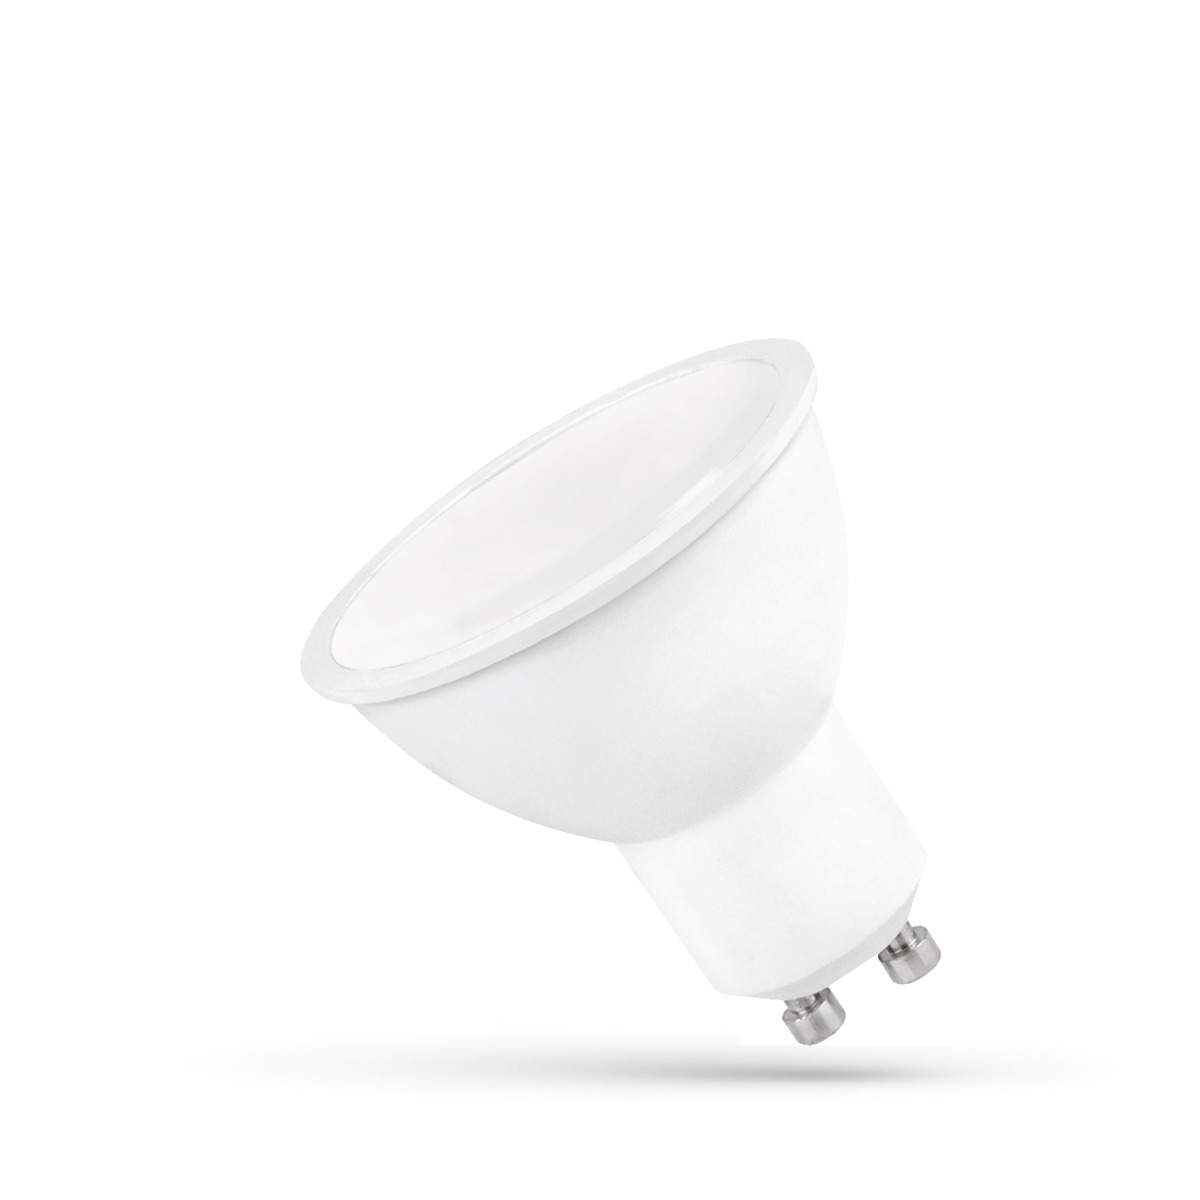 GU10 LED Light Bulb 6W with a cover made of milky white plastic